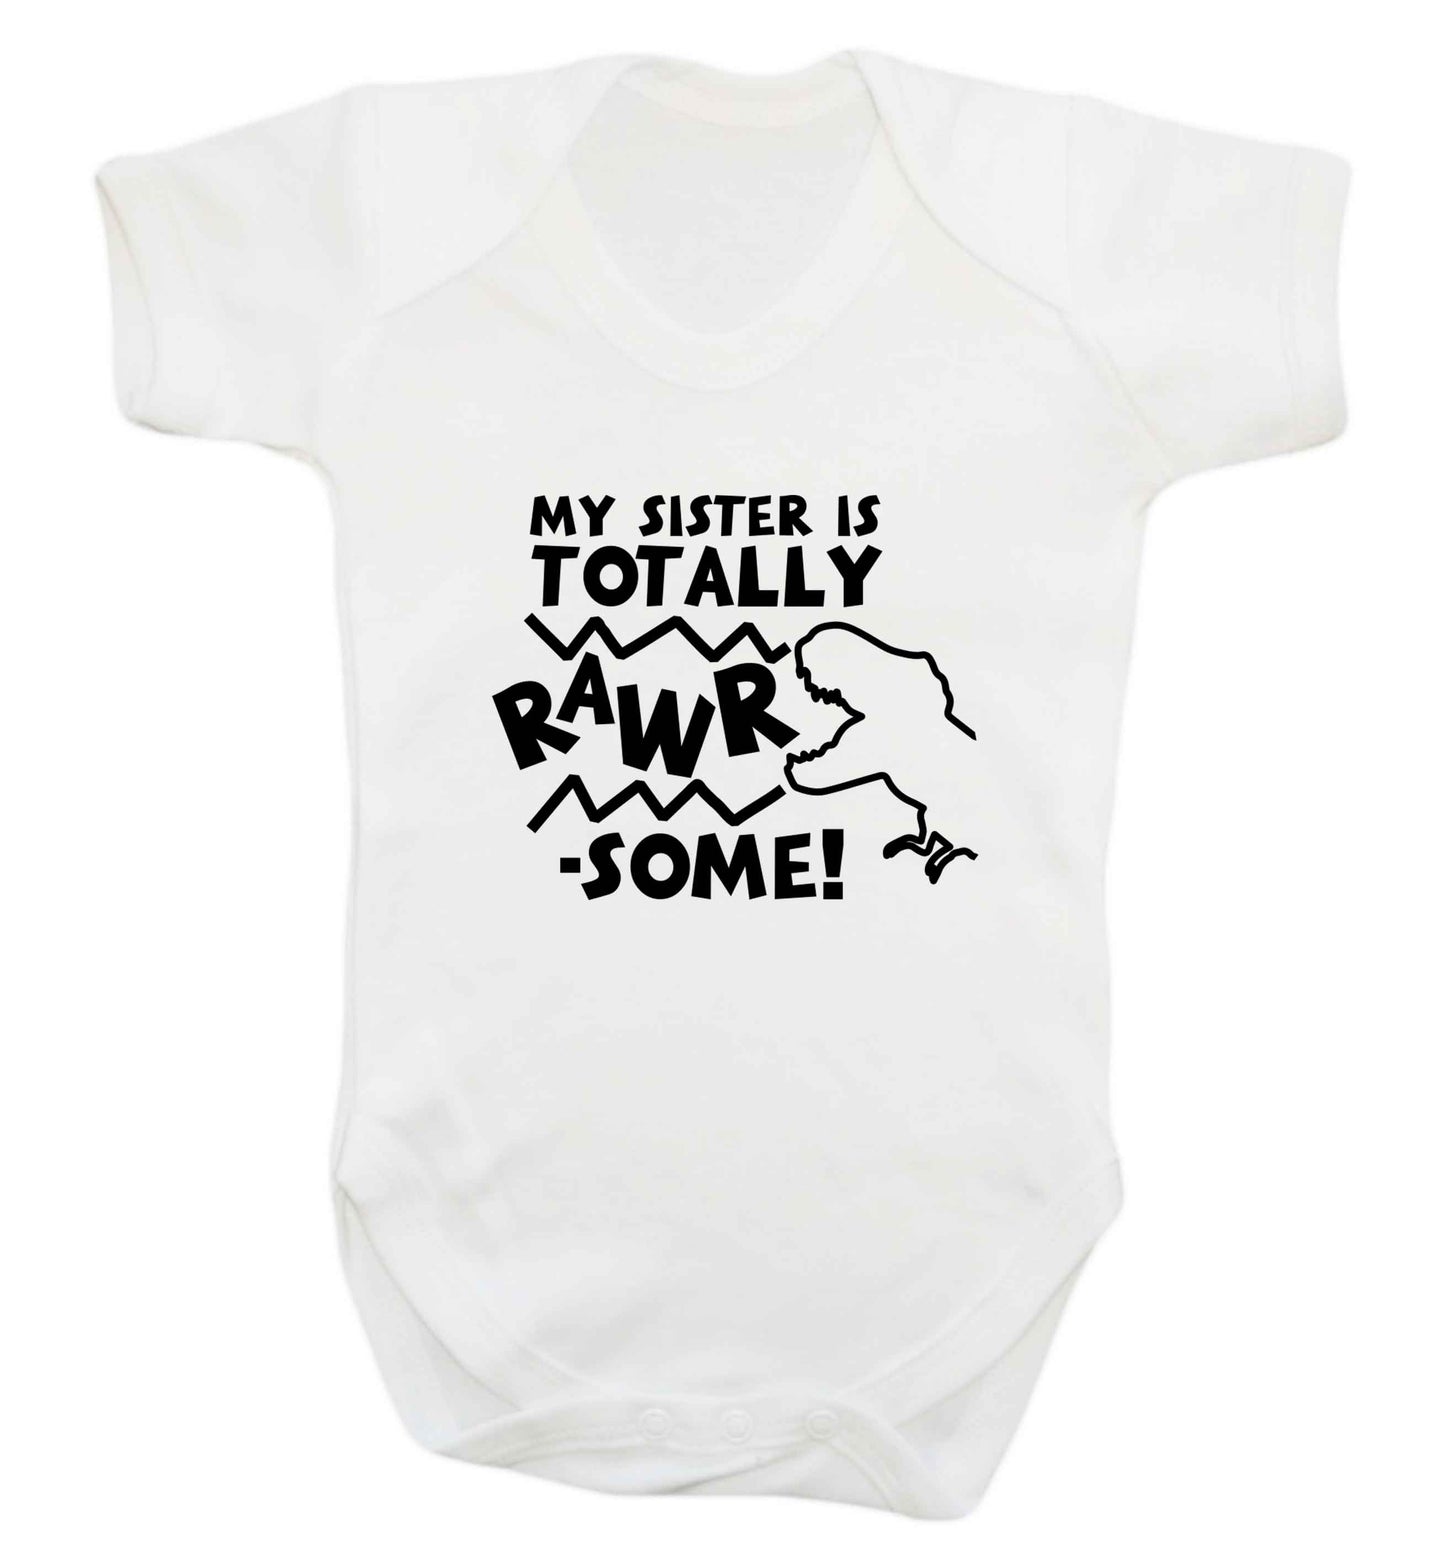 My sister is totally rawrsome baby vest white 18-24 months